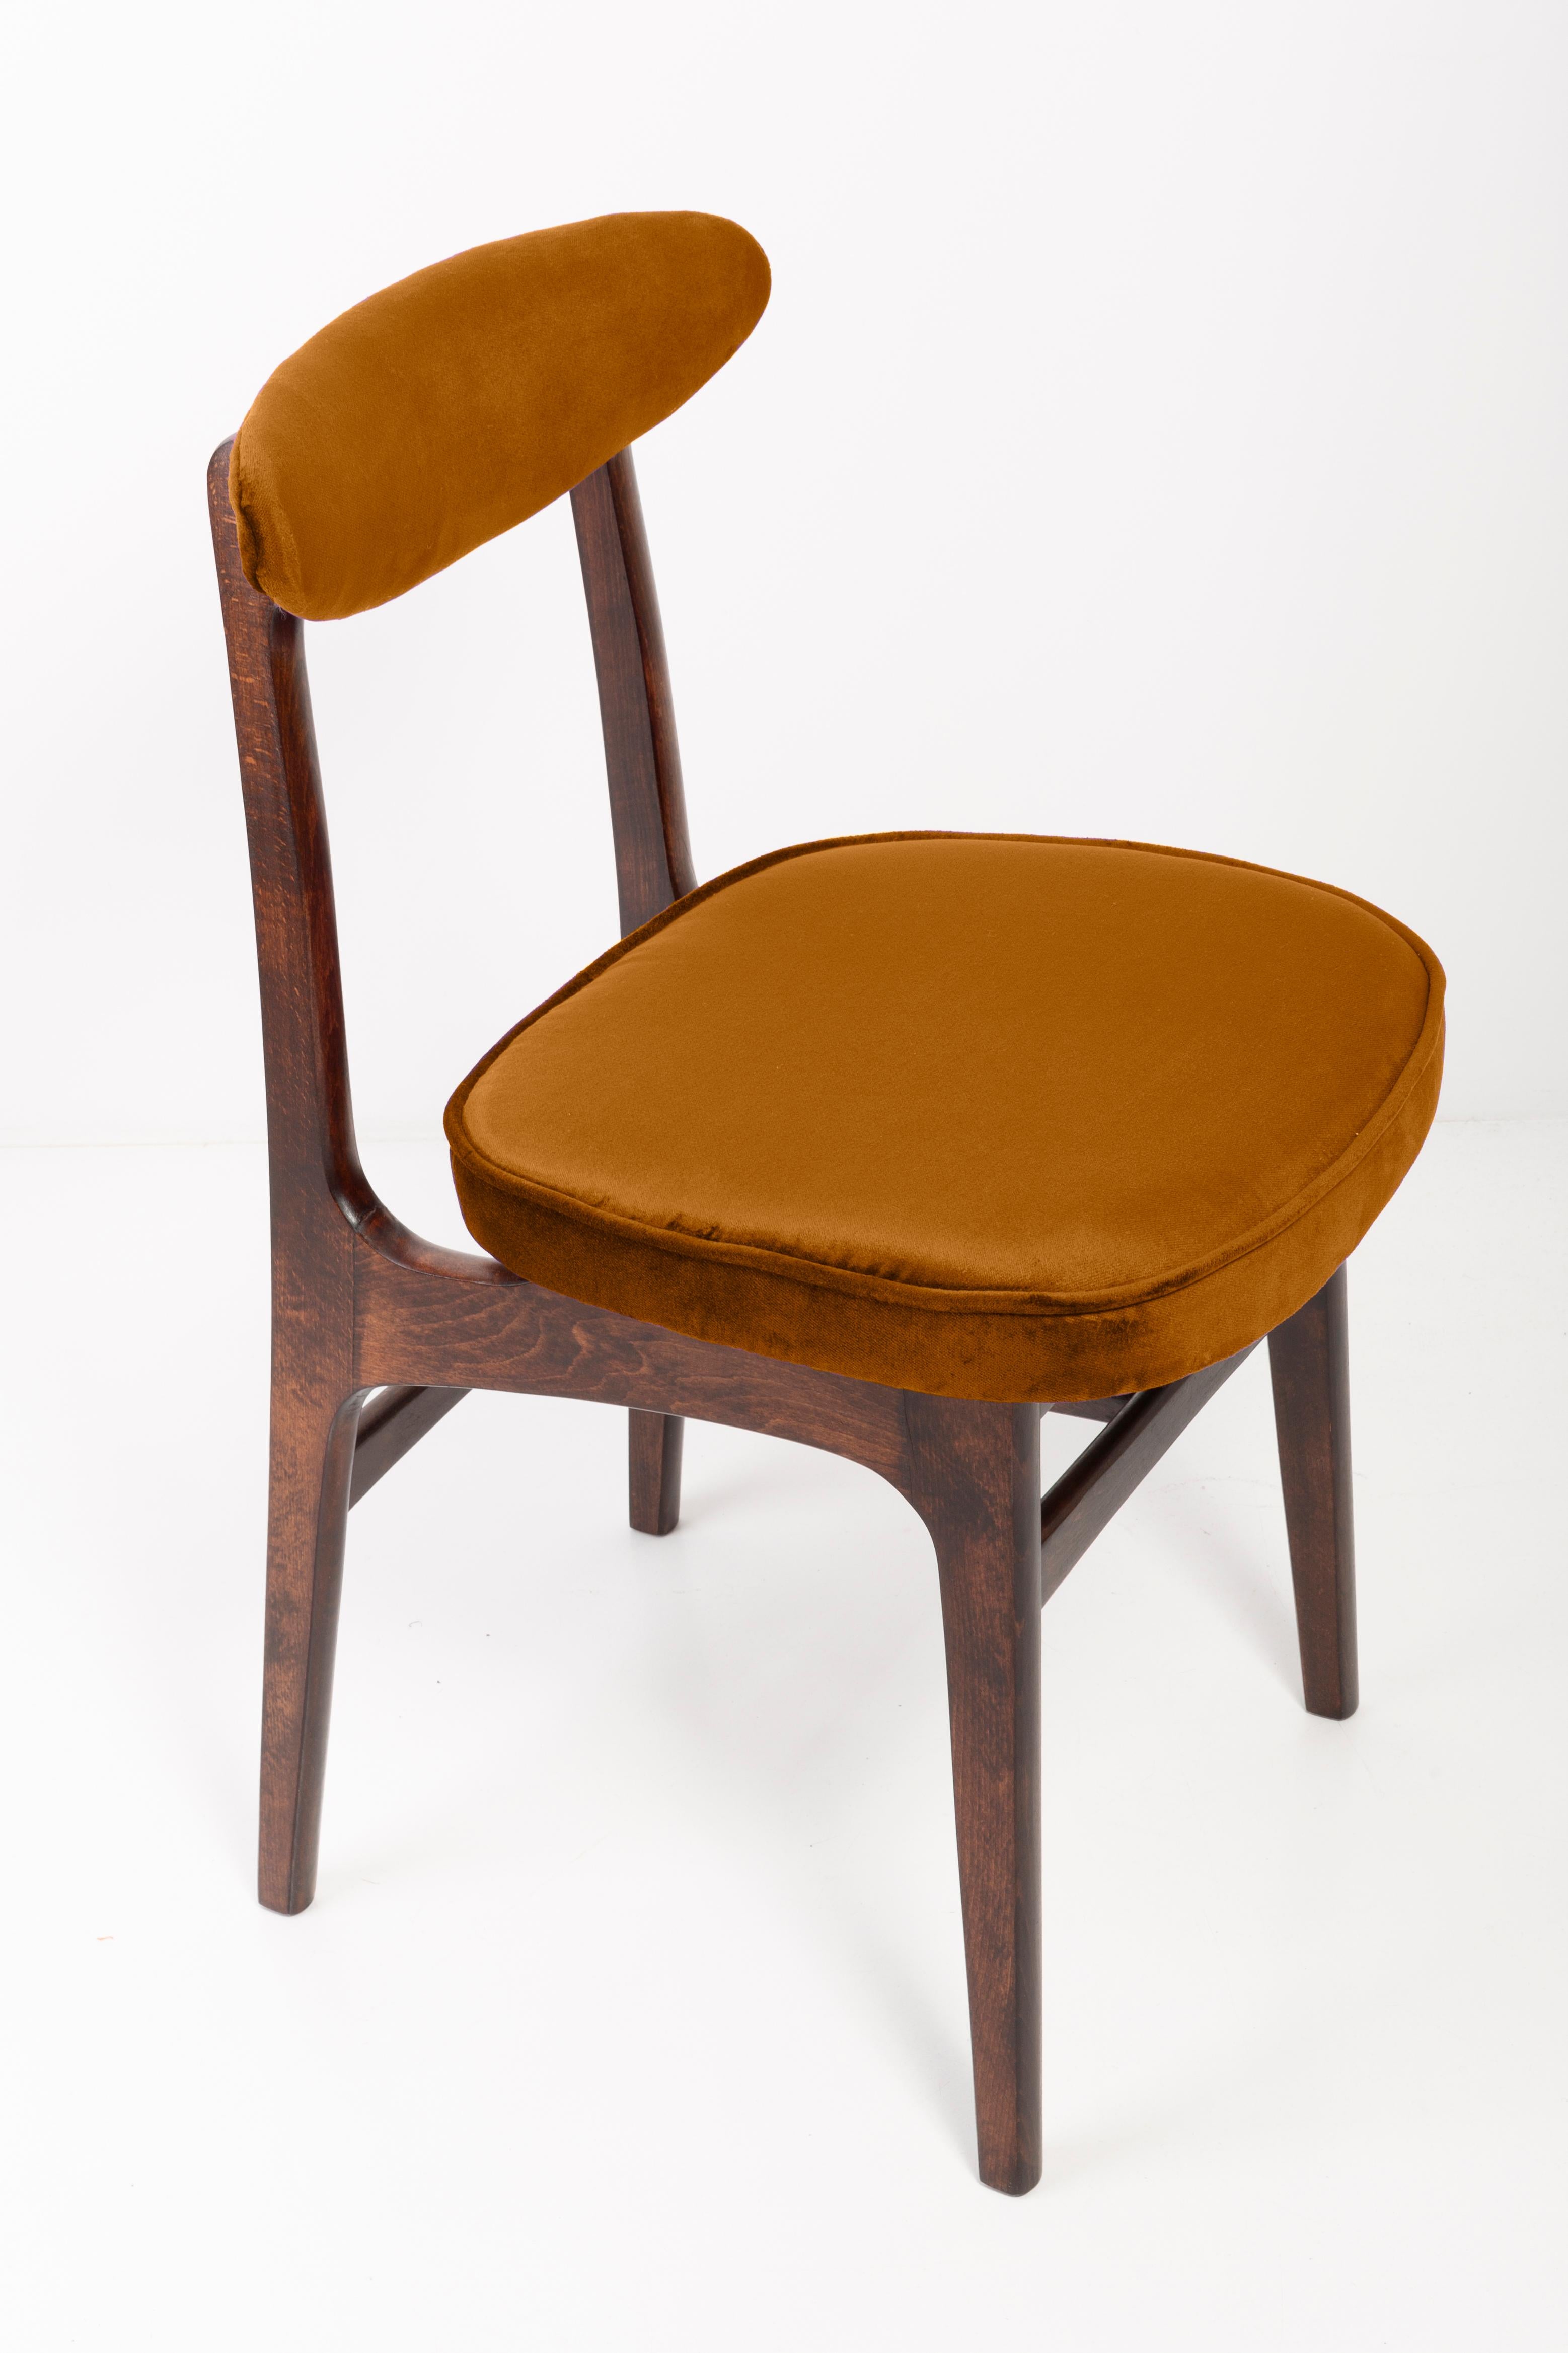 Eight chairs designed by Prof. Rajmund Halas. It has been made of beechwood. Chairs are after undergone a complete upholstery renovation, the woodwork has been refreshed. Seats and backs were dressed in a copper (color 960), durable and pleasant to